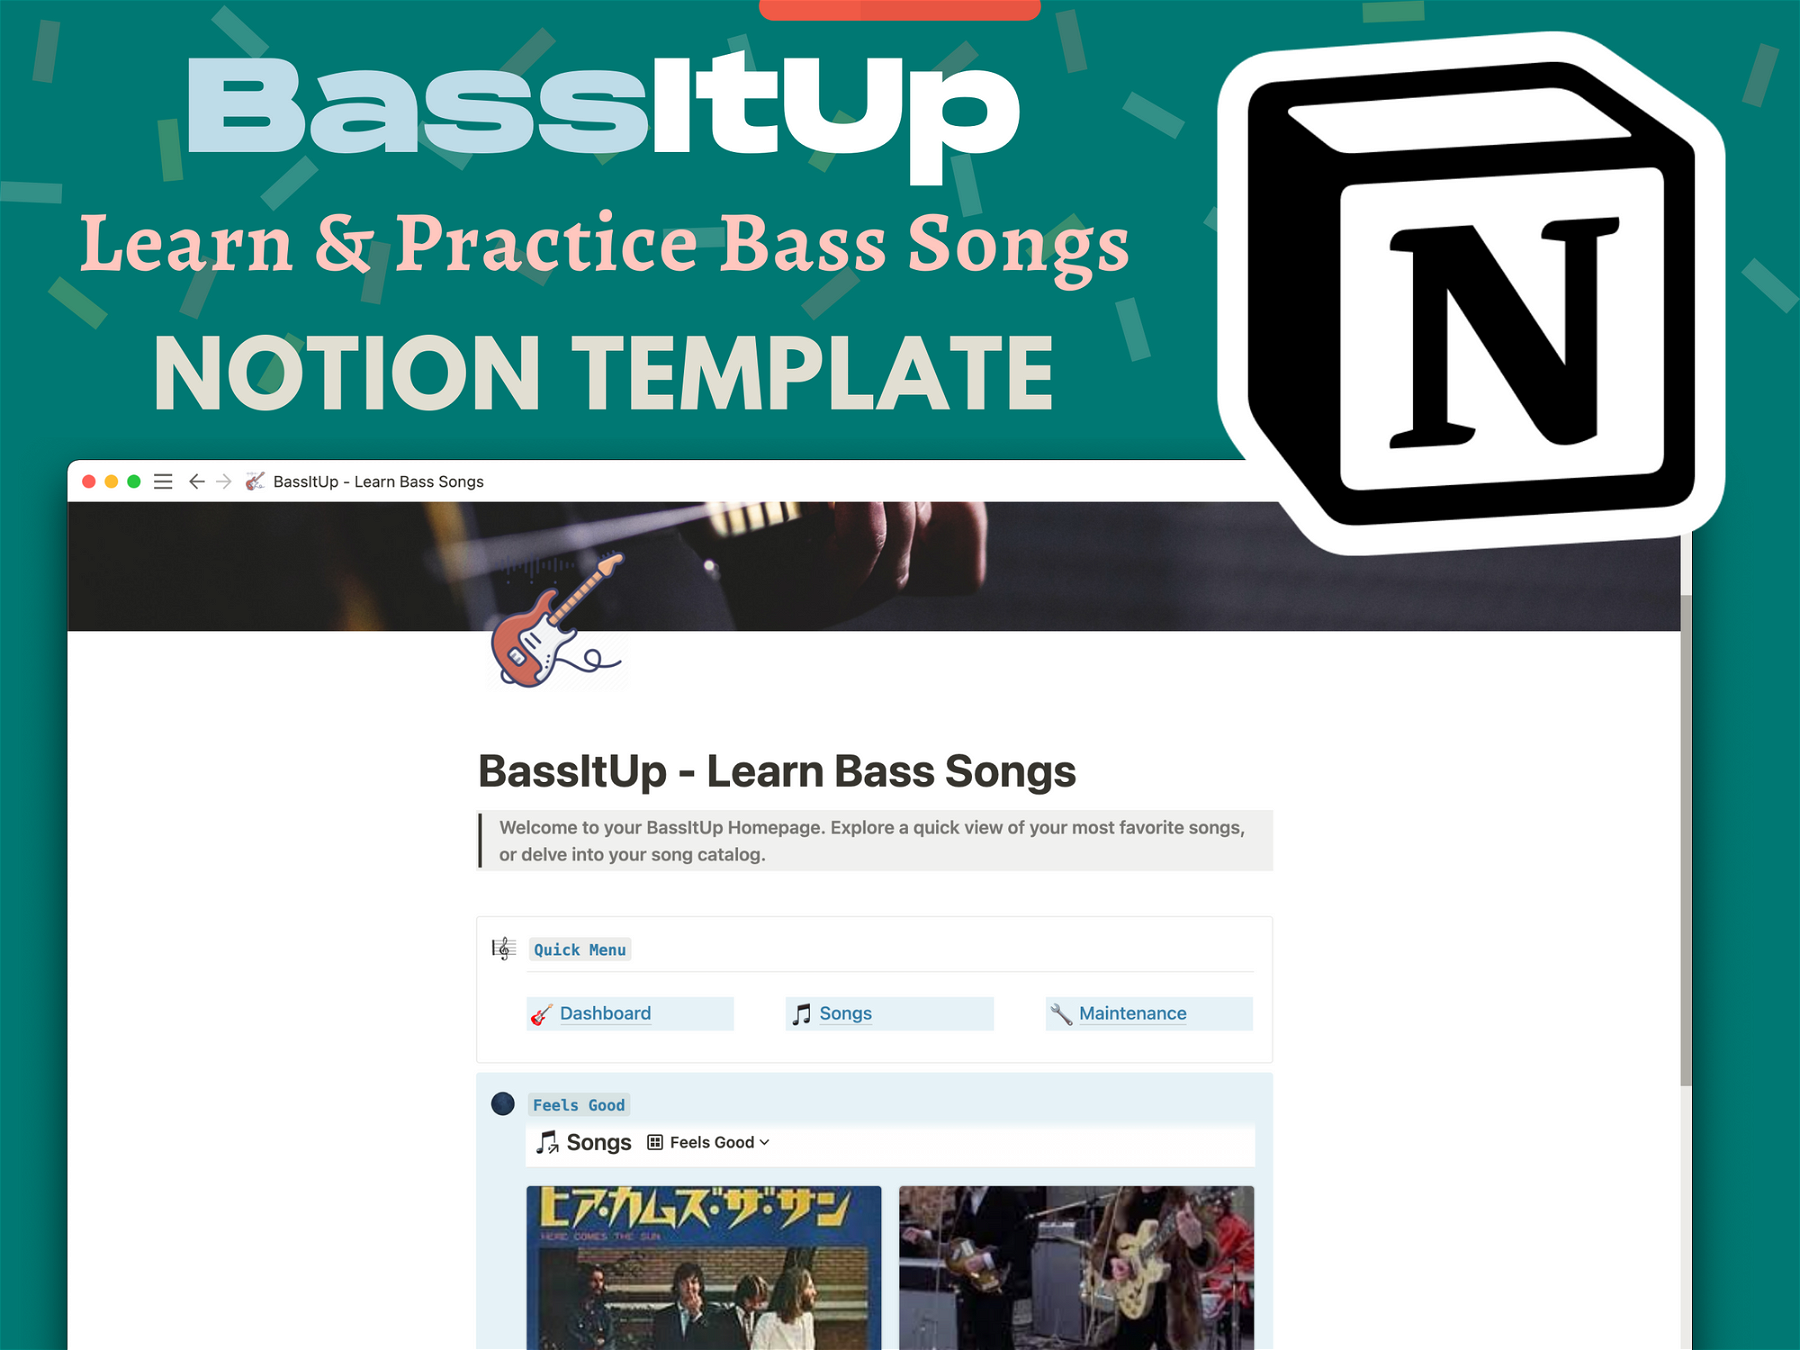 BassItUp - Learn Bass Songs